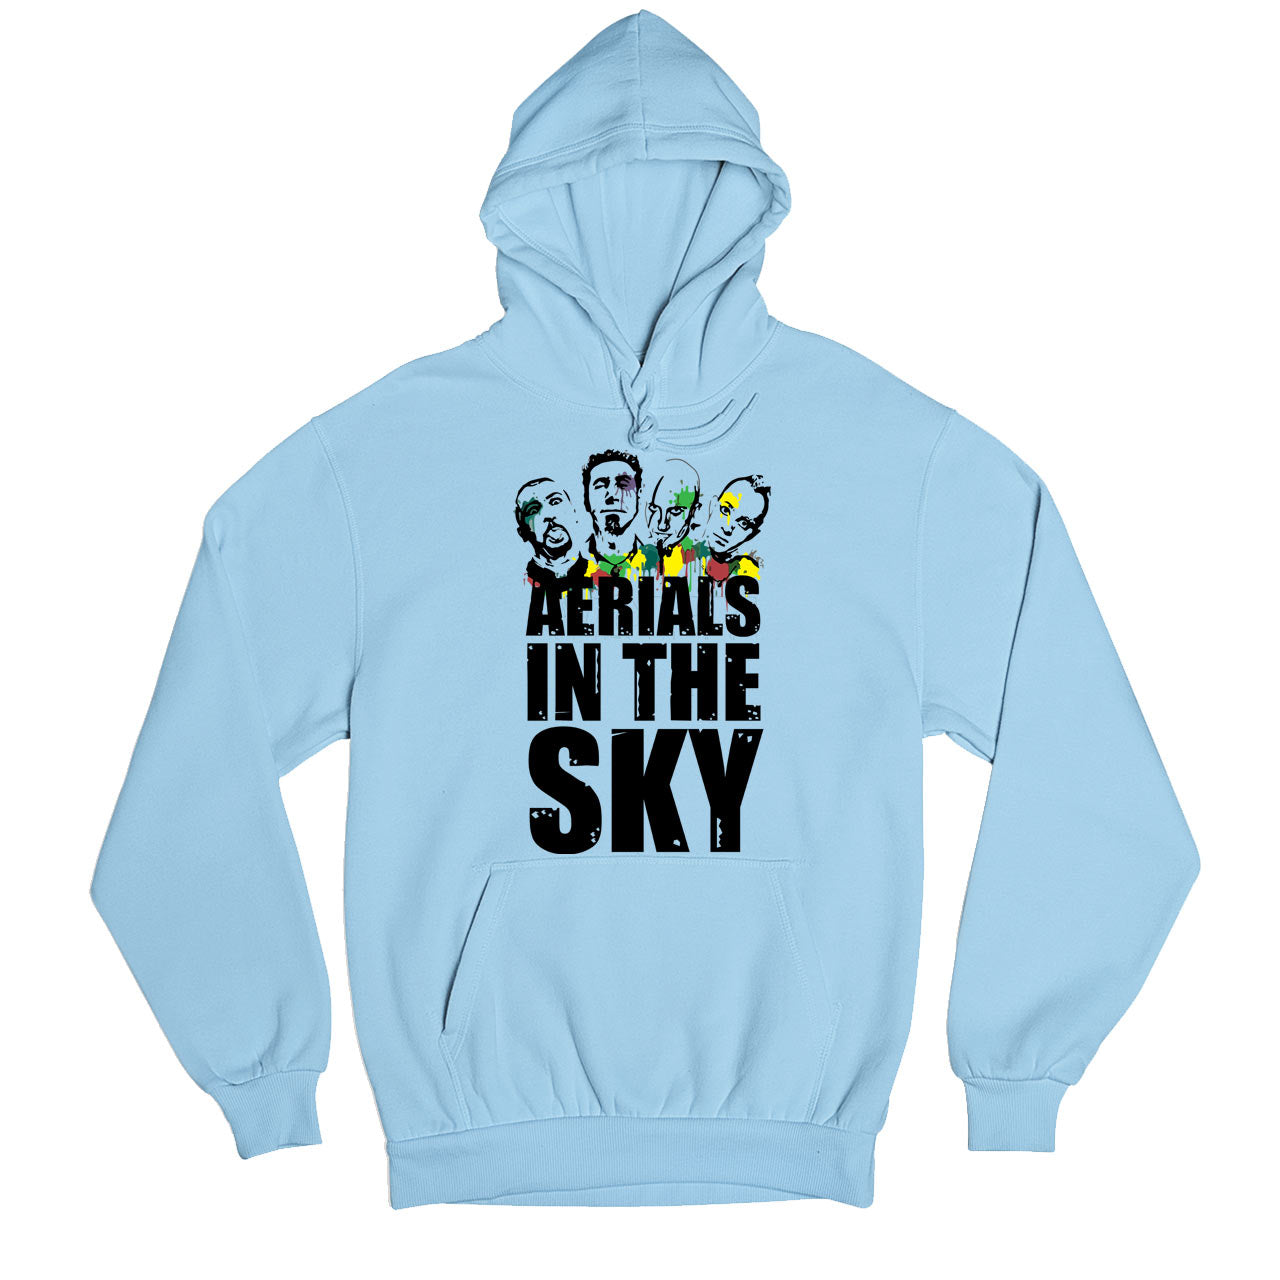 system of a down aerials in the sky hoodie hooded sweatshirt winterwear music band buy online india the banyan tee tbt men women girls boys unisex baby blue